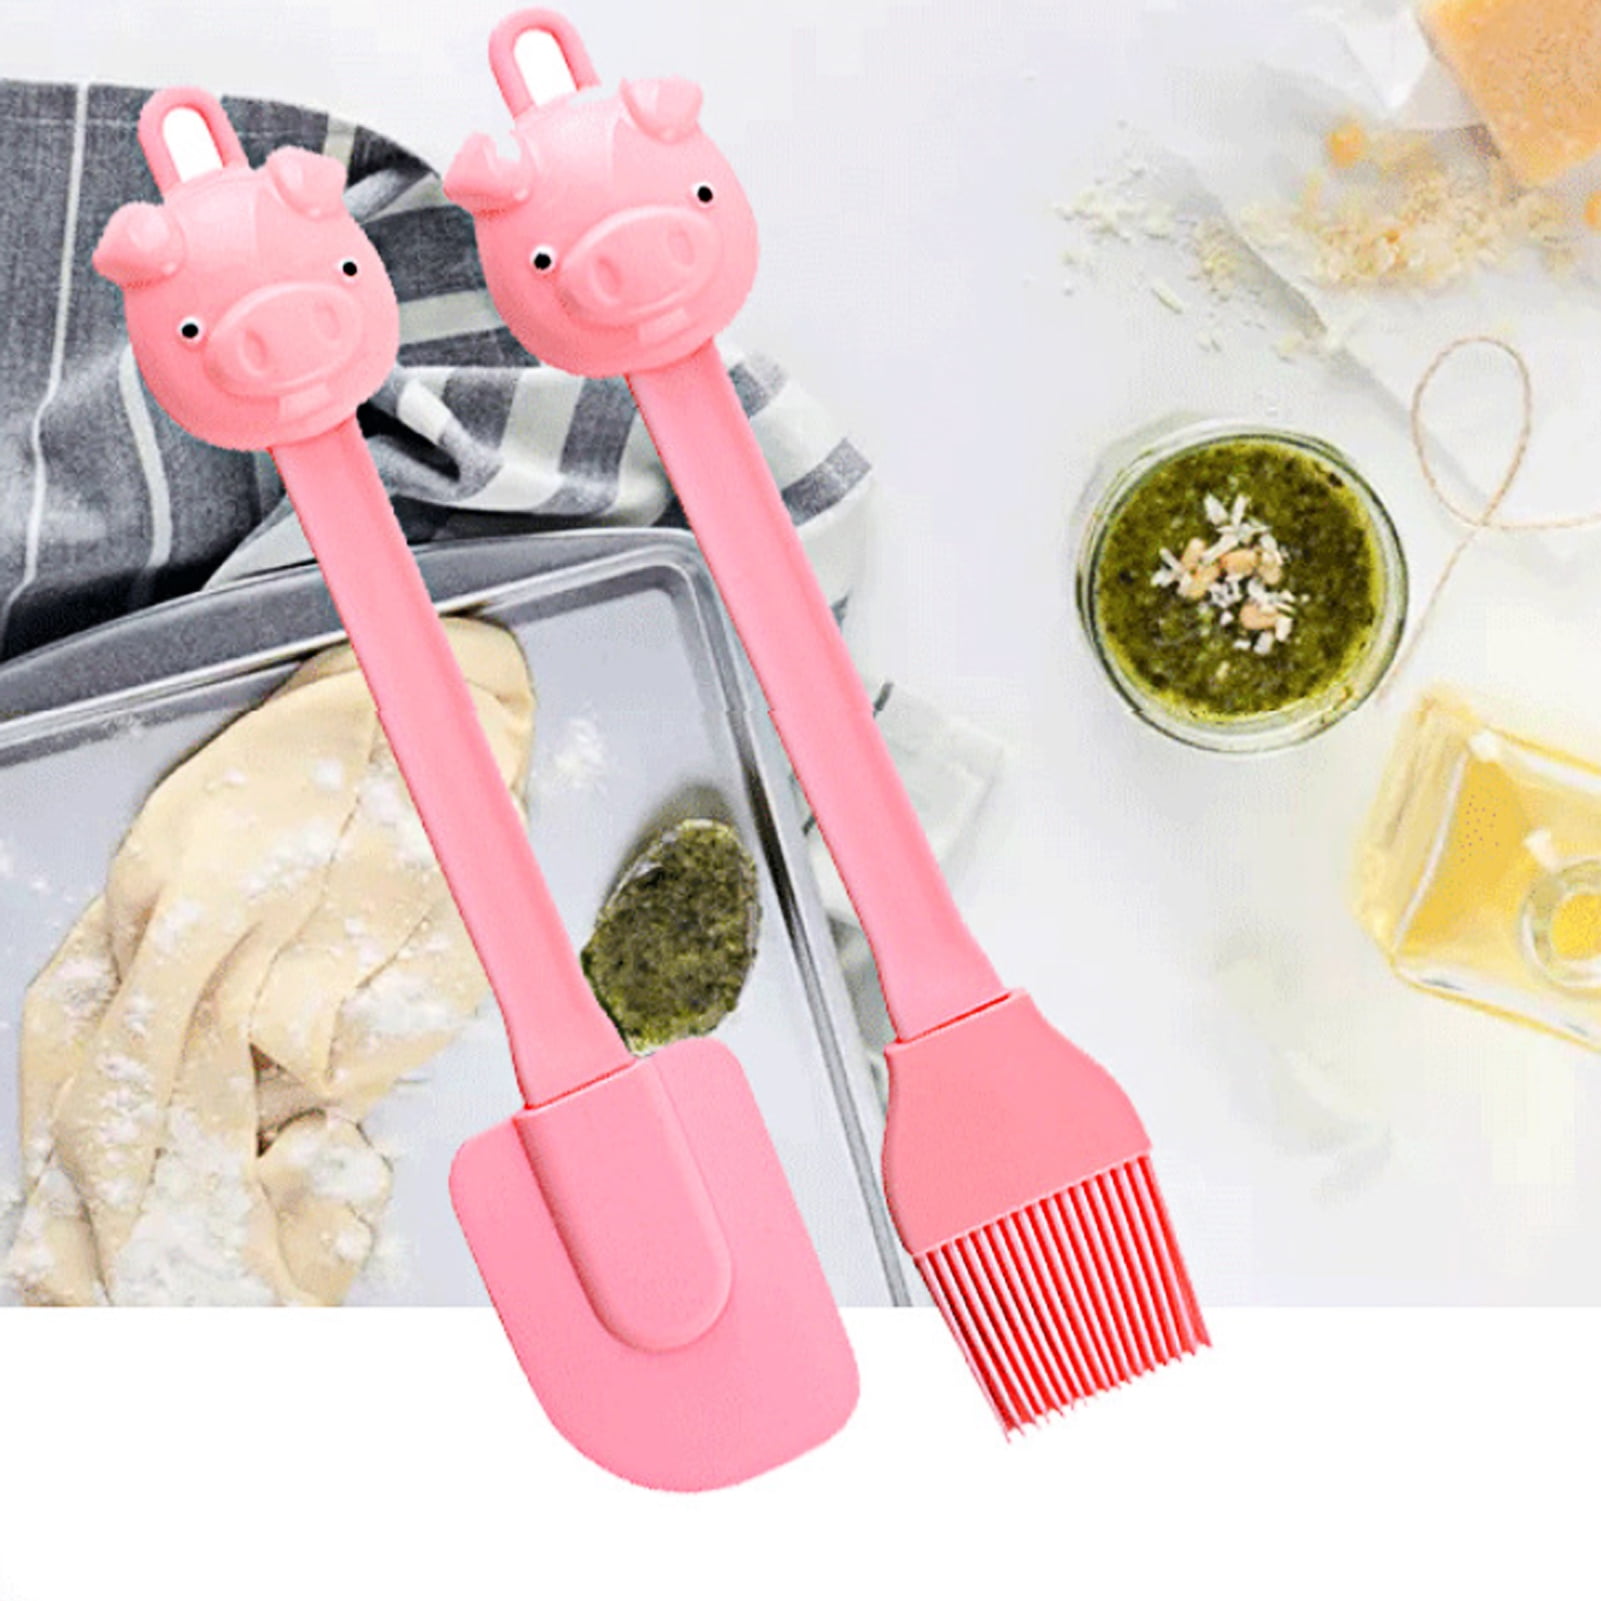 5pcs/set, Cartoon Men Design Silicone Baking Set, Silicone Kitchen Spoon,  Egg Beater, Scraper And Oil Brush, Can Stand, Cute Baking Tool, Household Ba